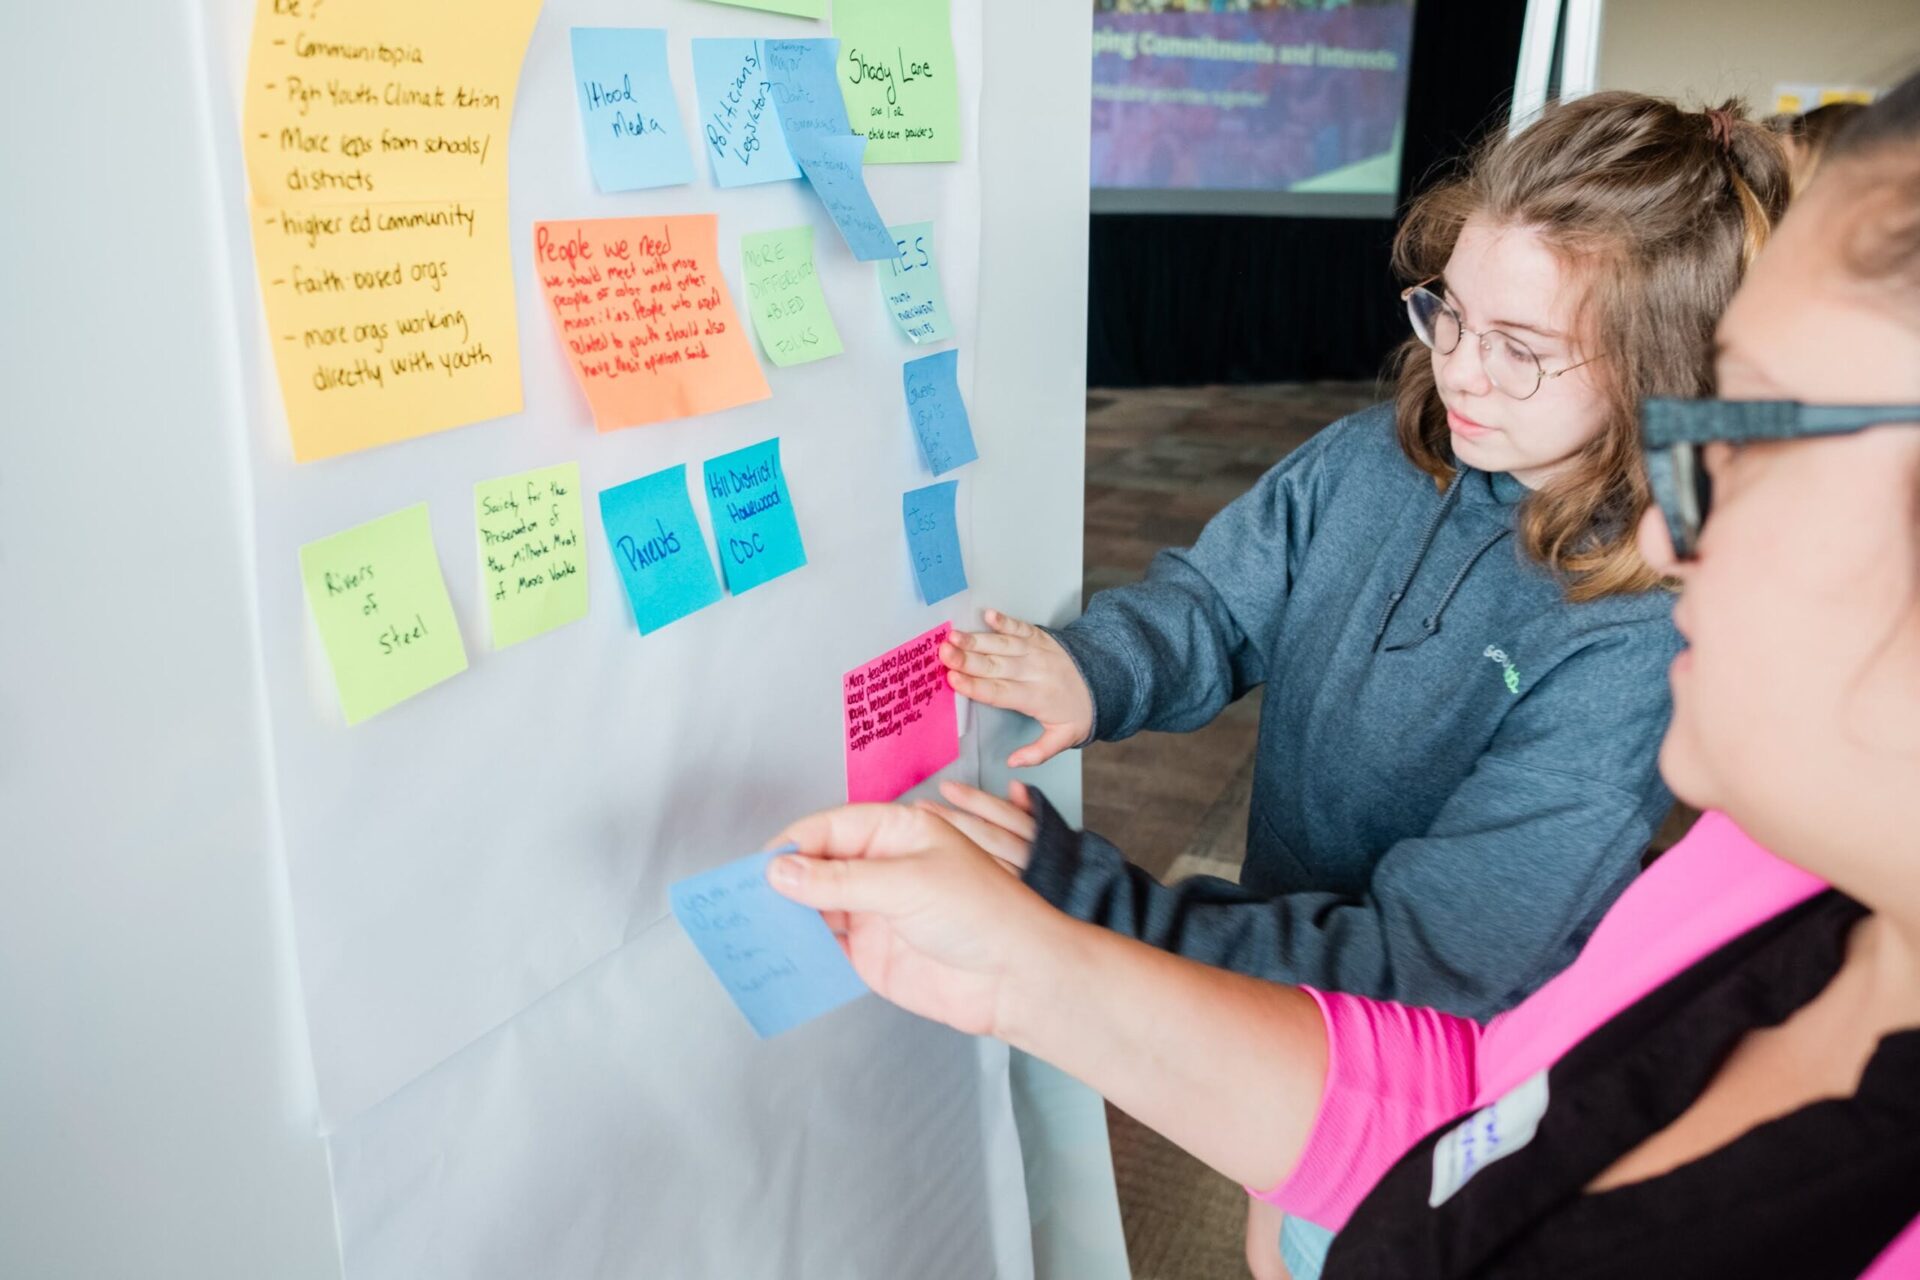 A student and an educator add post-it notes to a brainstorming sheet at a Remake Learning event.